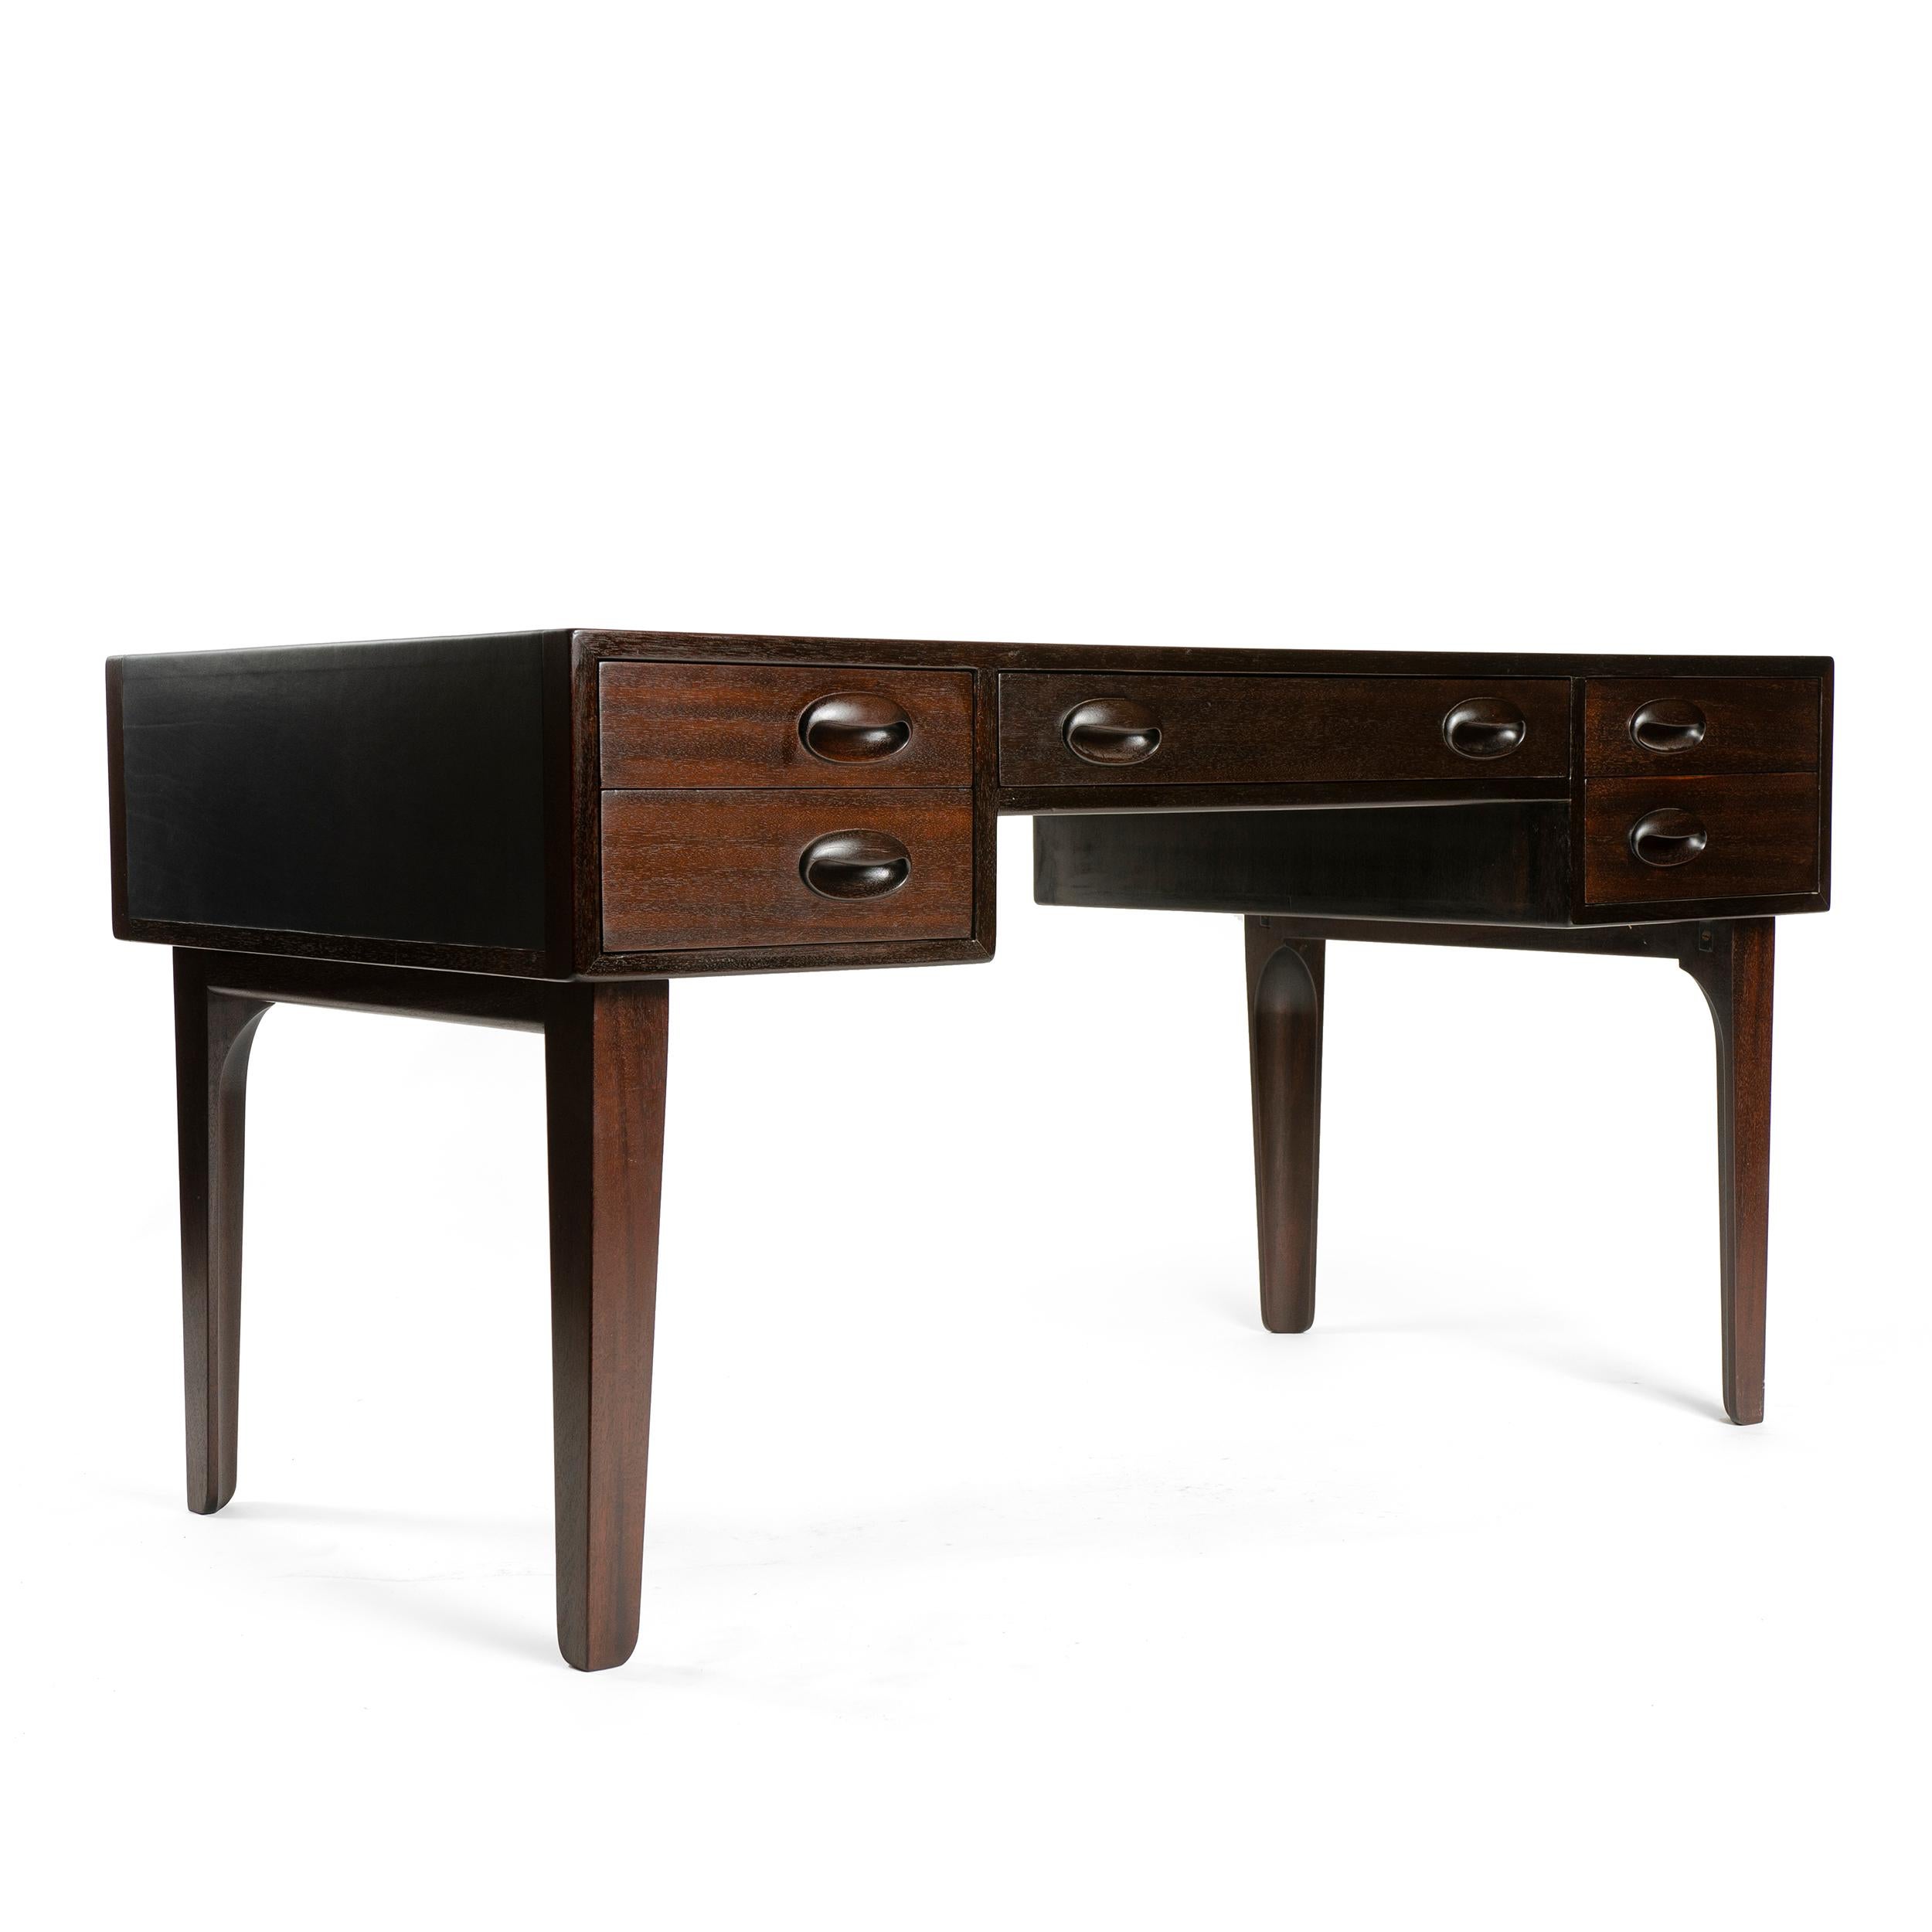 A mahogany partners desk with deep navy leather inset top, four drawers and central compartment with hinged front, over tapered legs.